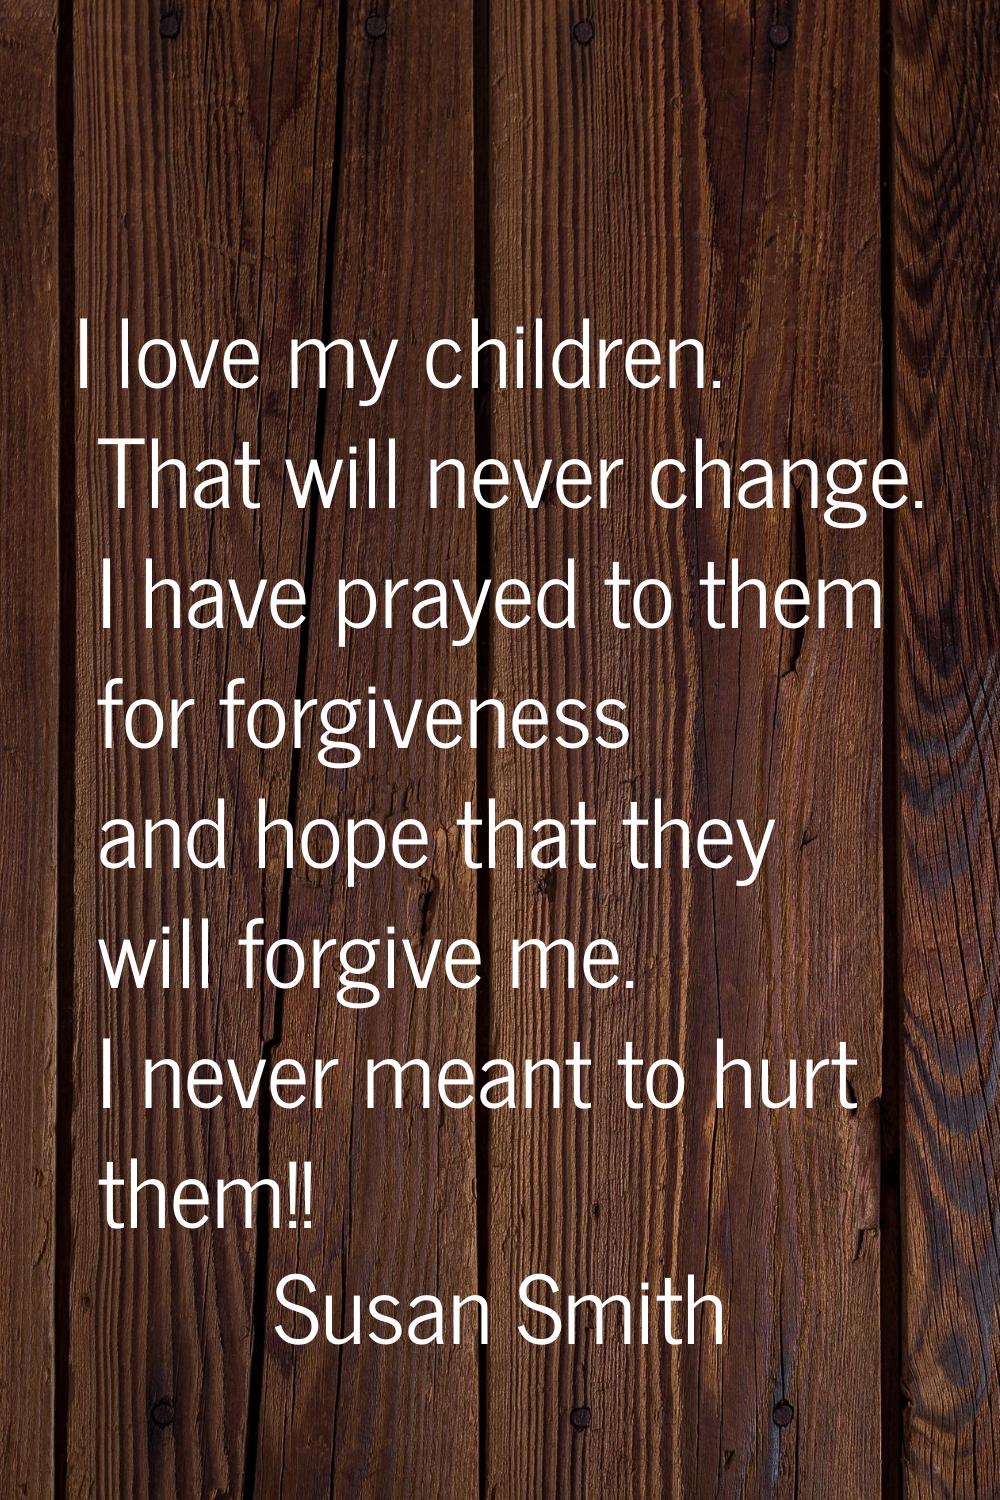 I love my children. That will never change. I have prayed to them for forgiveness and hope that the